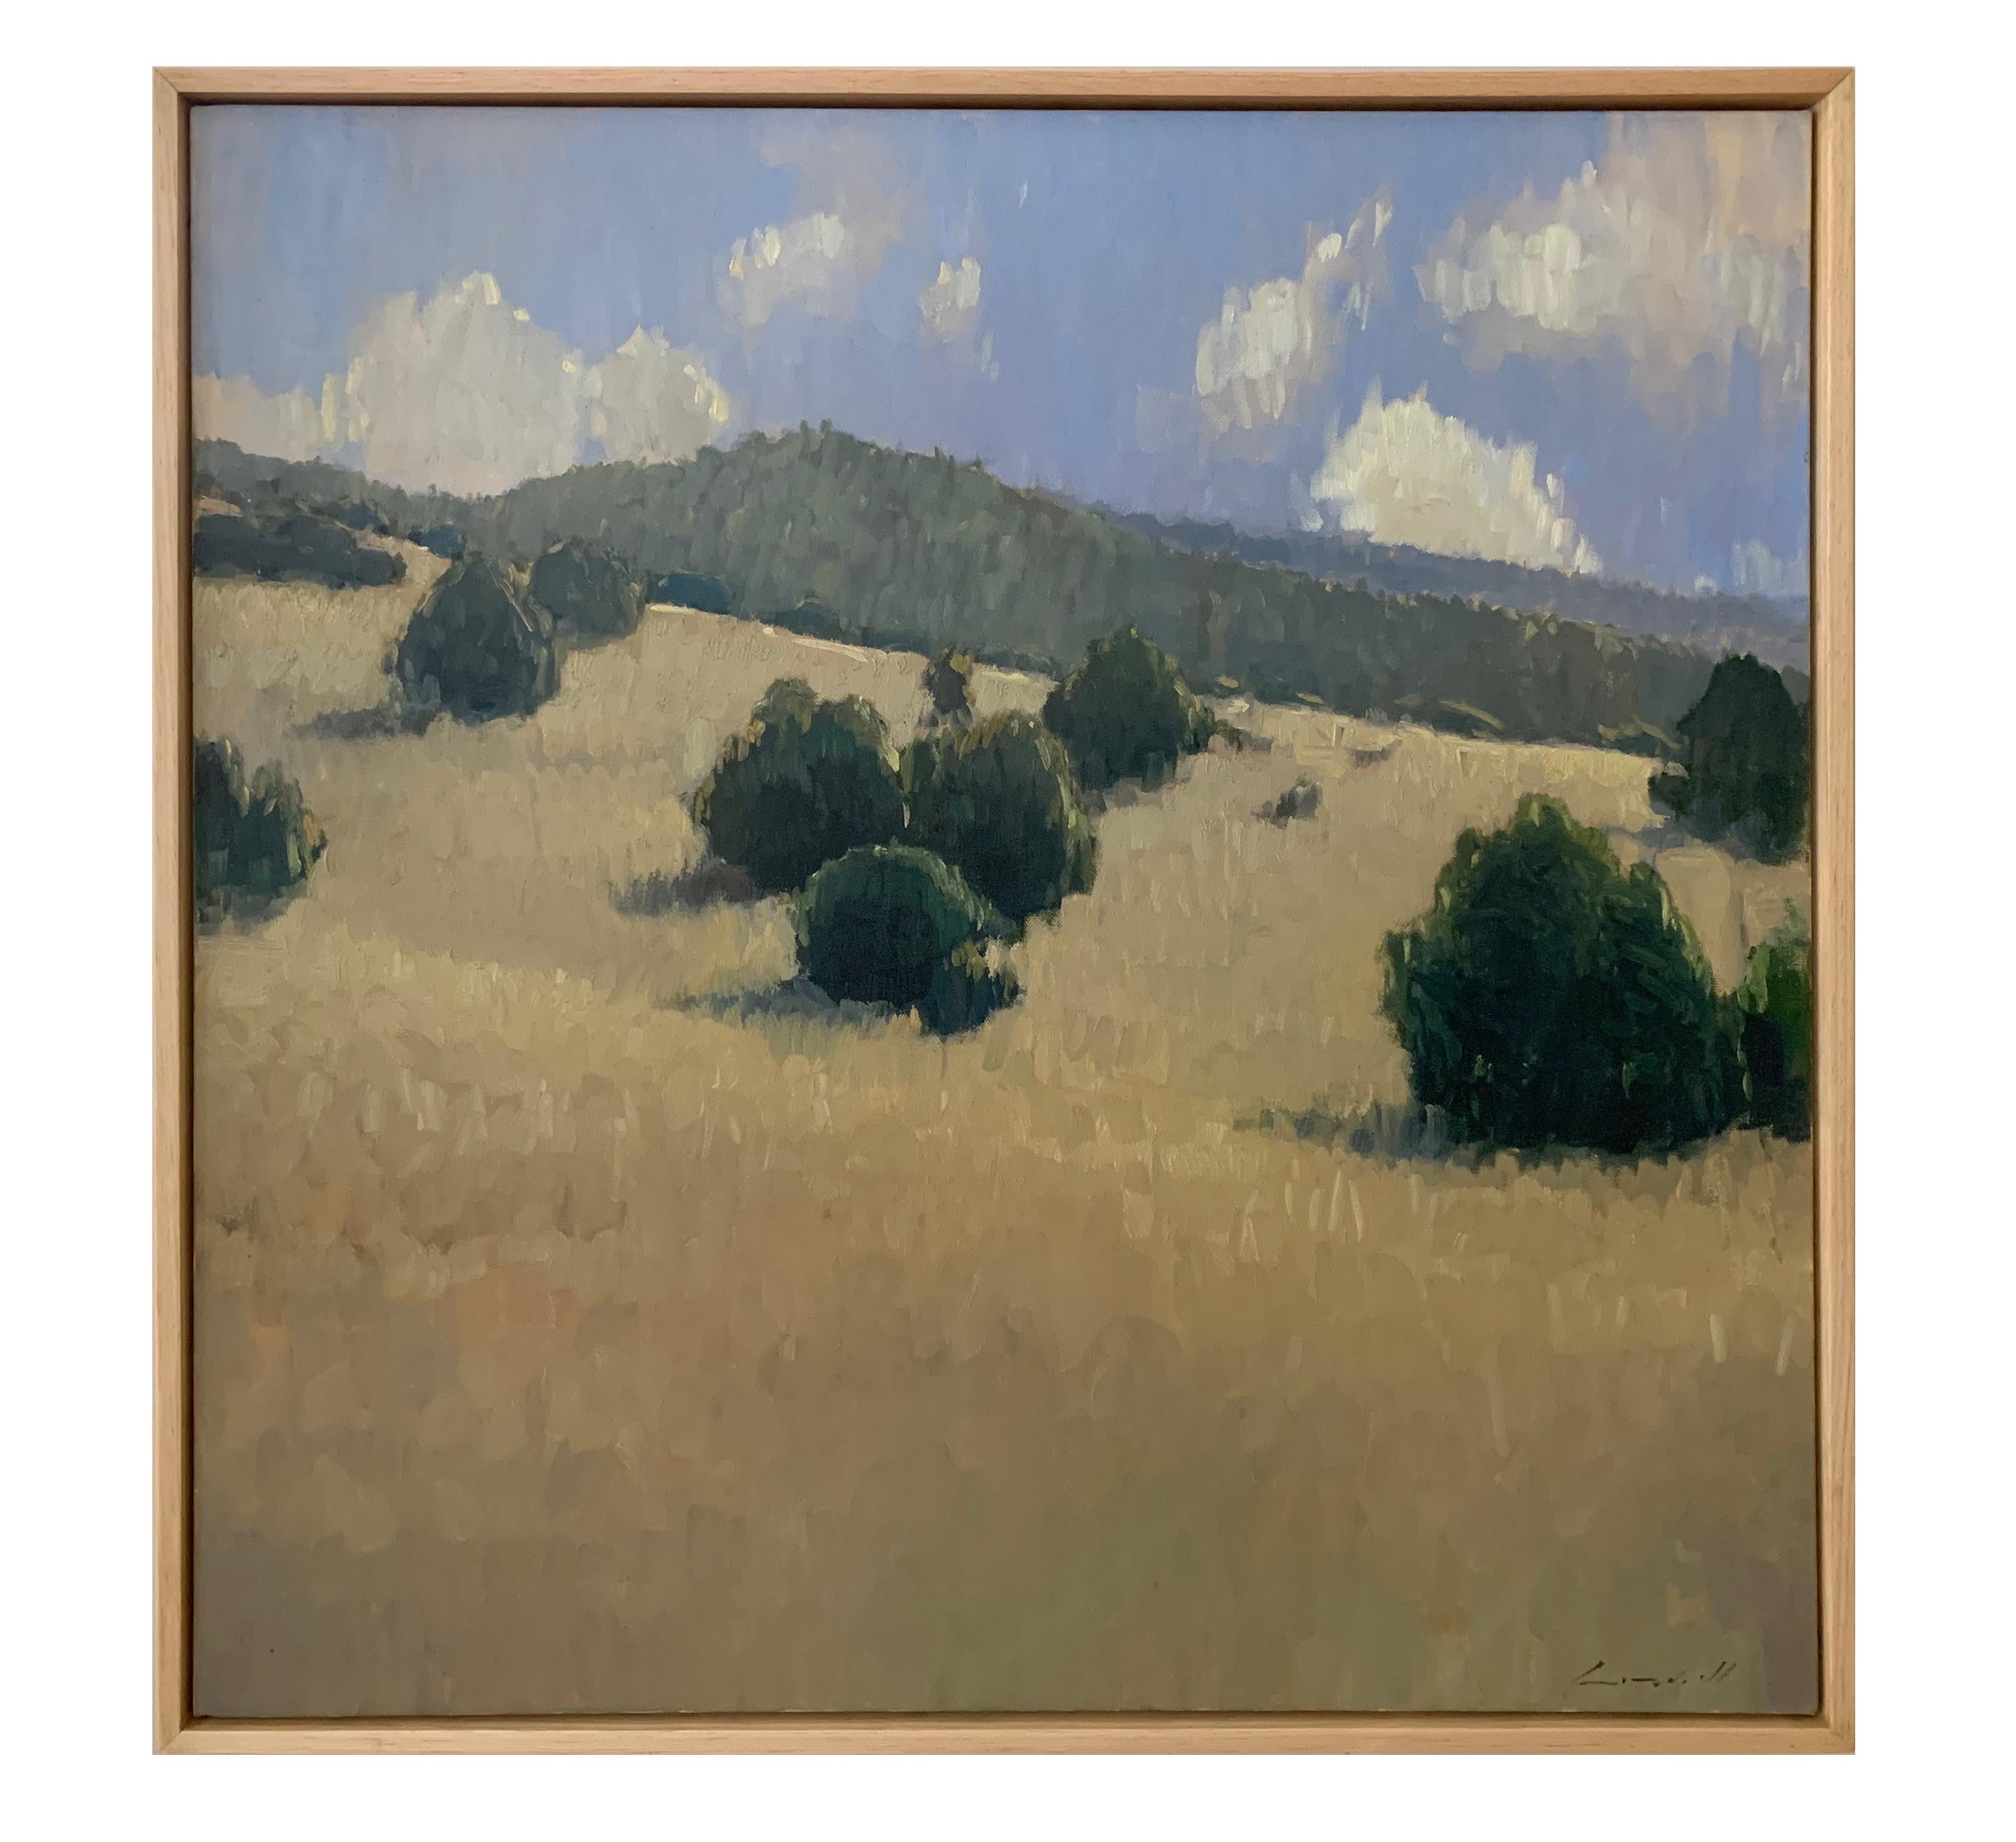 Summer Hillside (lush pinions, golden grasses, Colorado sunshine) - Painting by Peter Campbell